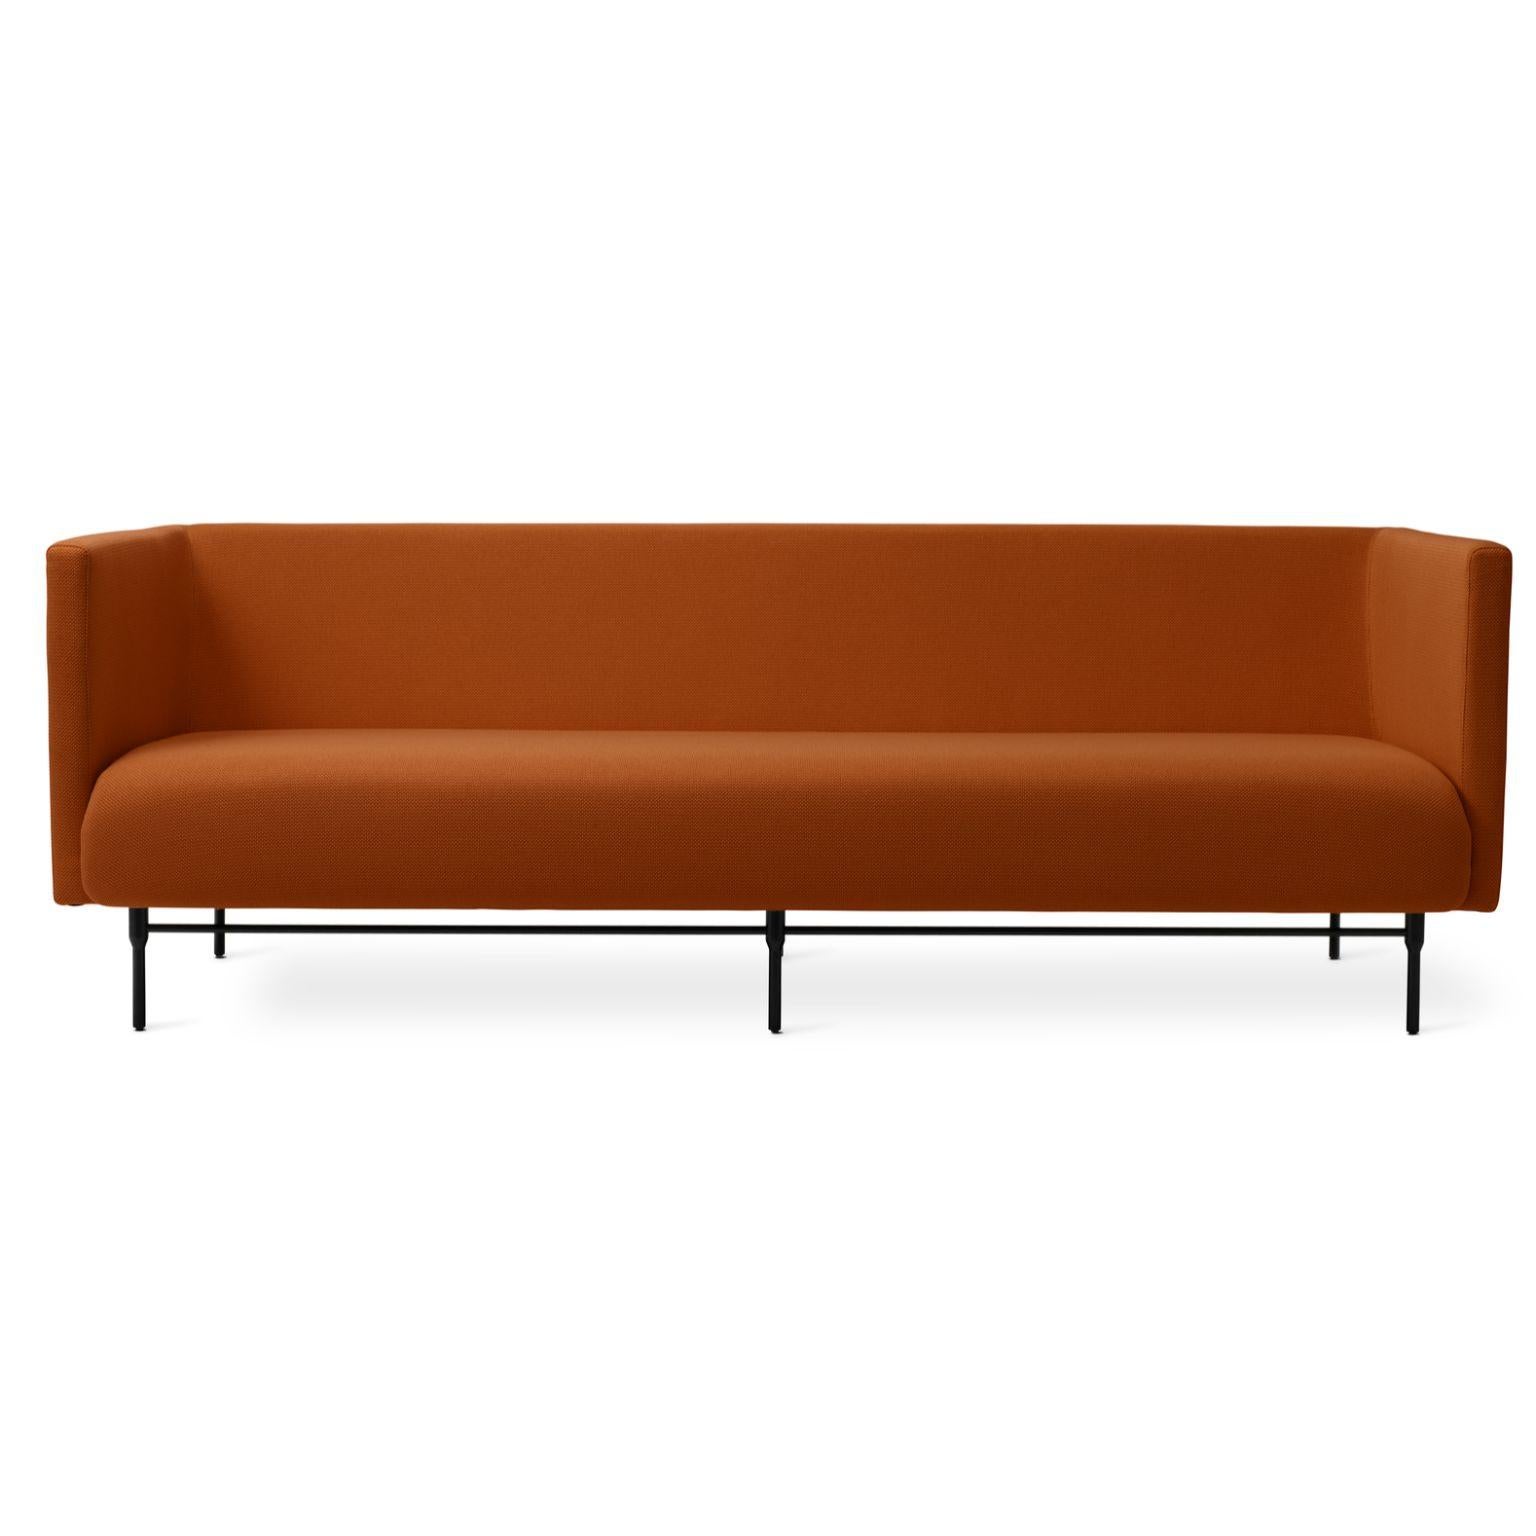 Galore 3 Seater Terracotta by Warm Nordic
Dimensions: D222 x W83 x H 76 cm
Material: Textile upholstery, Powder coated black steel legs, Wooden frame, foam, spring system.
Weight: 62 kg
Also available in different colours and finishes. Please